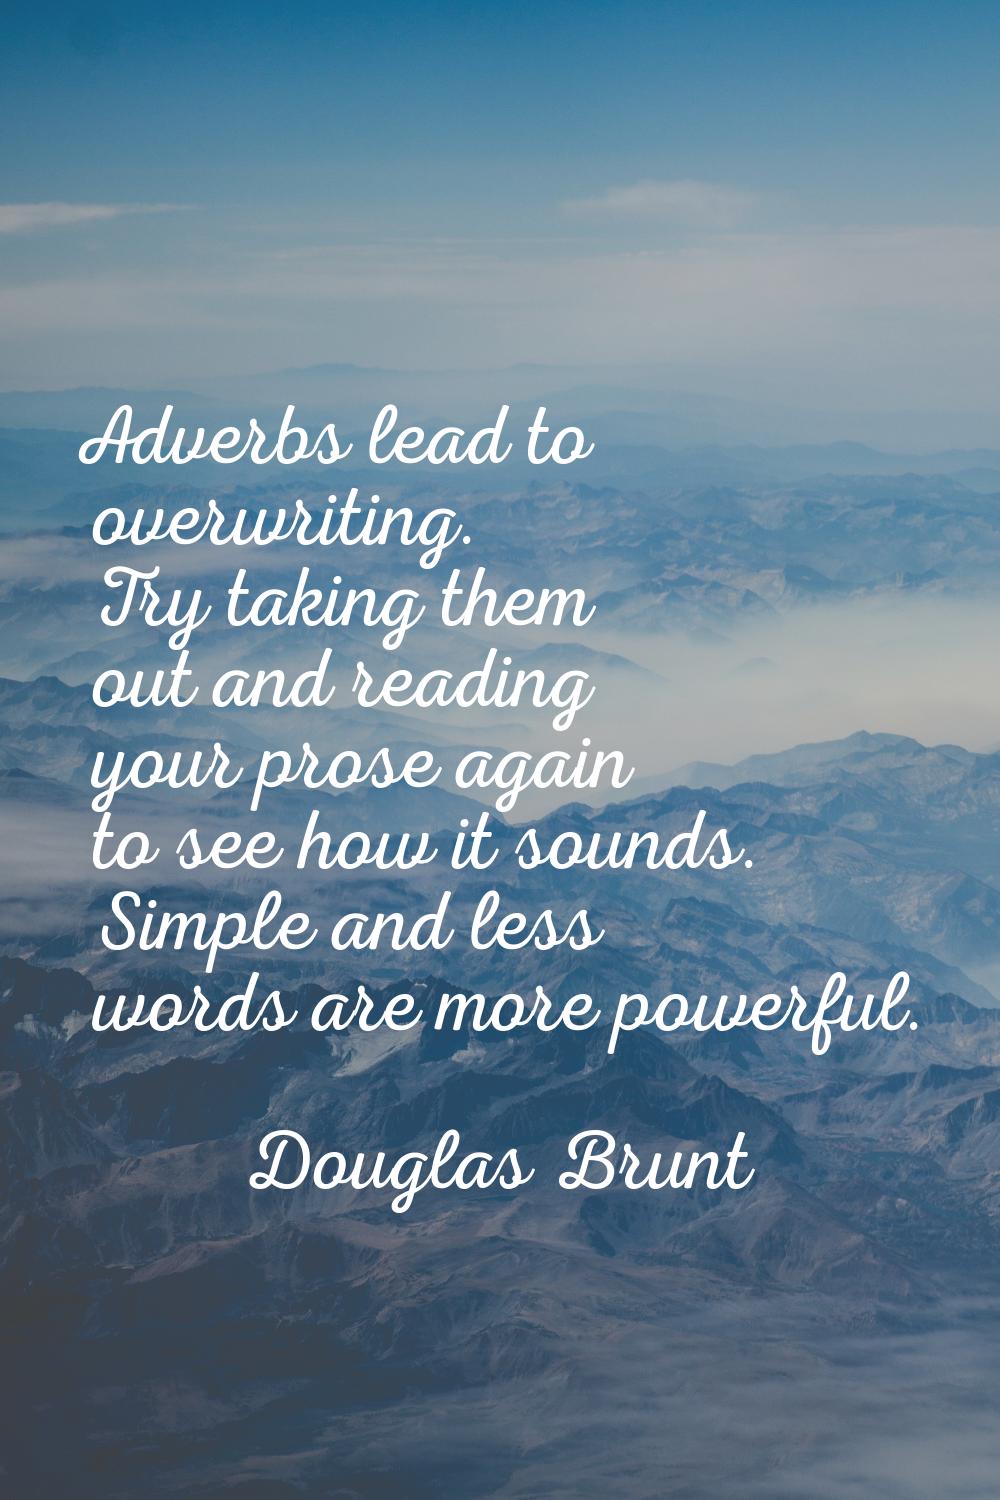 Adverbs lead to overwriting. Try taking them out and reading your prose again to see how it sounds.